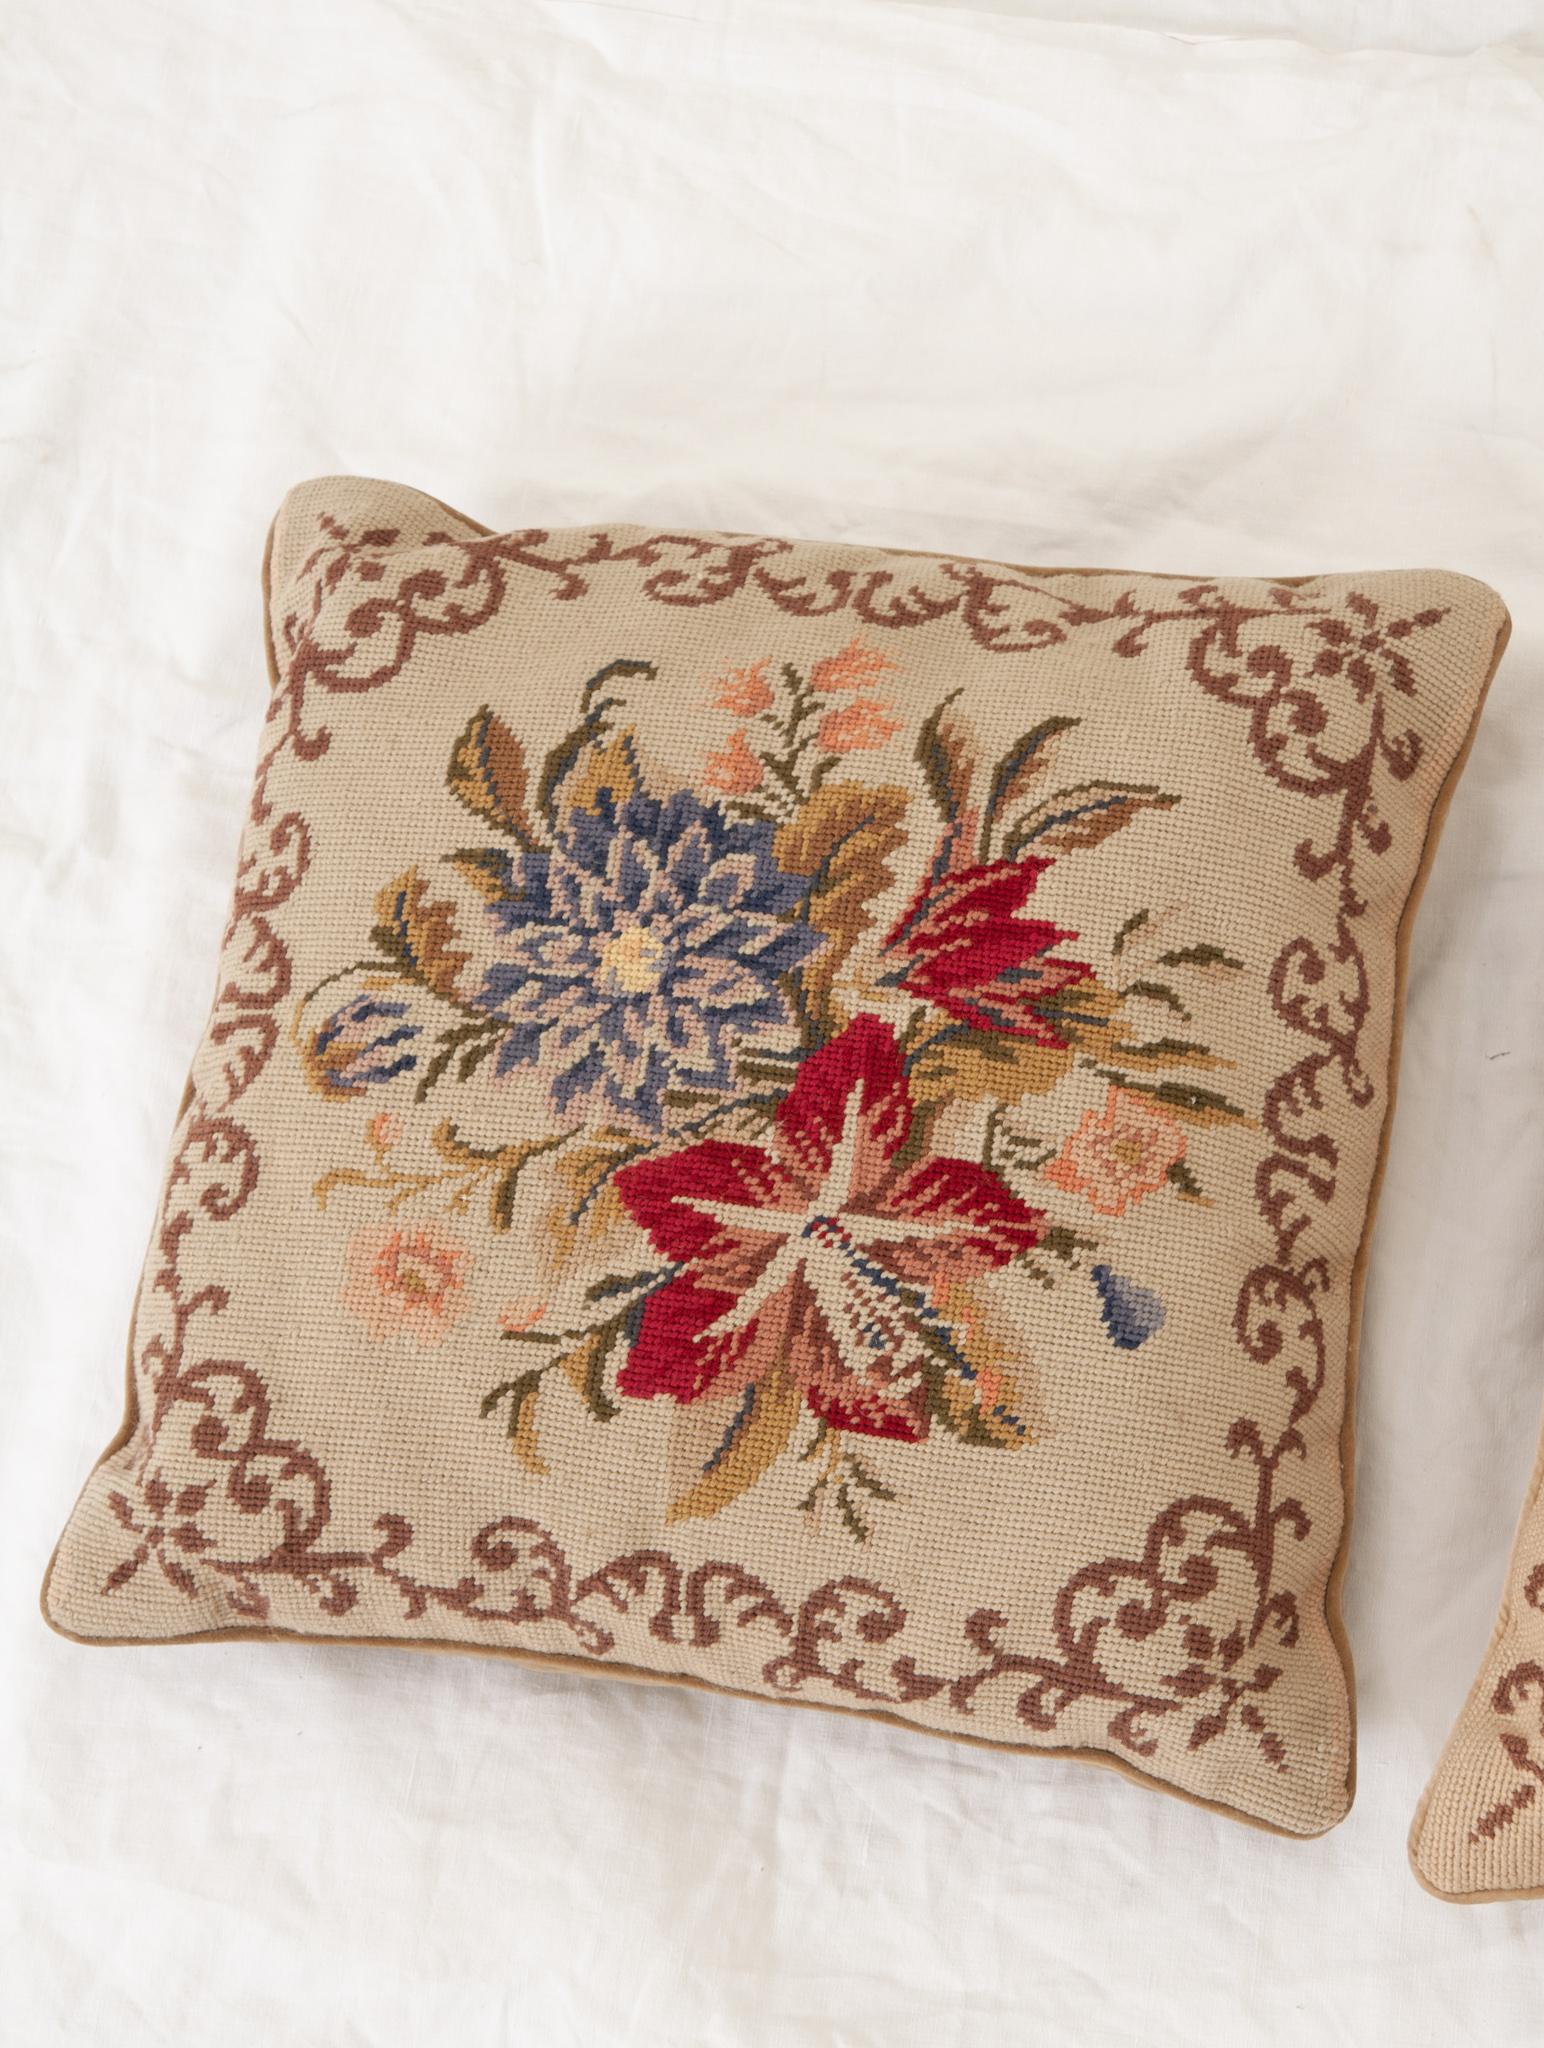 Other Pair of Vintage Square Needlepoint Pillows For Sale